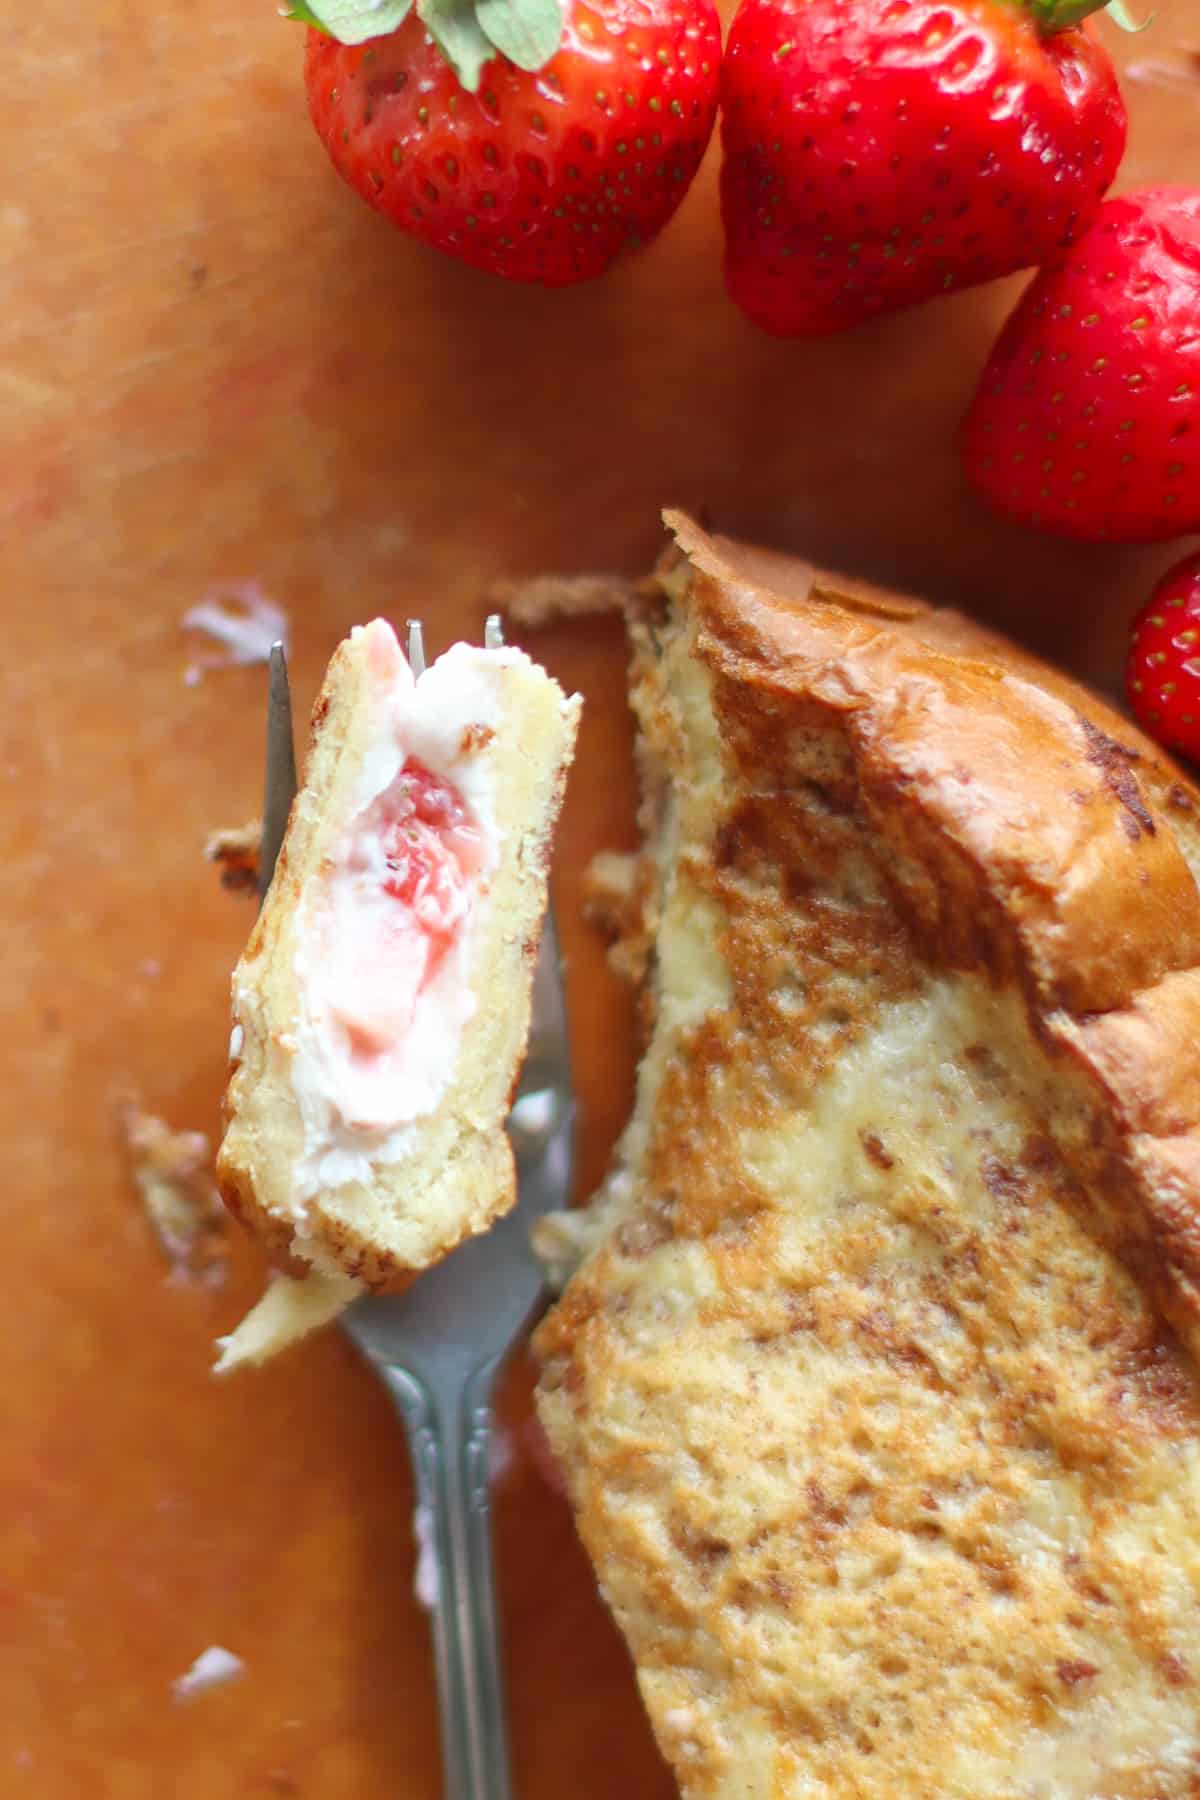 A fork with a bite of stuffed french toast.